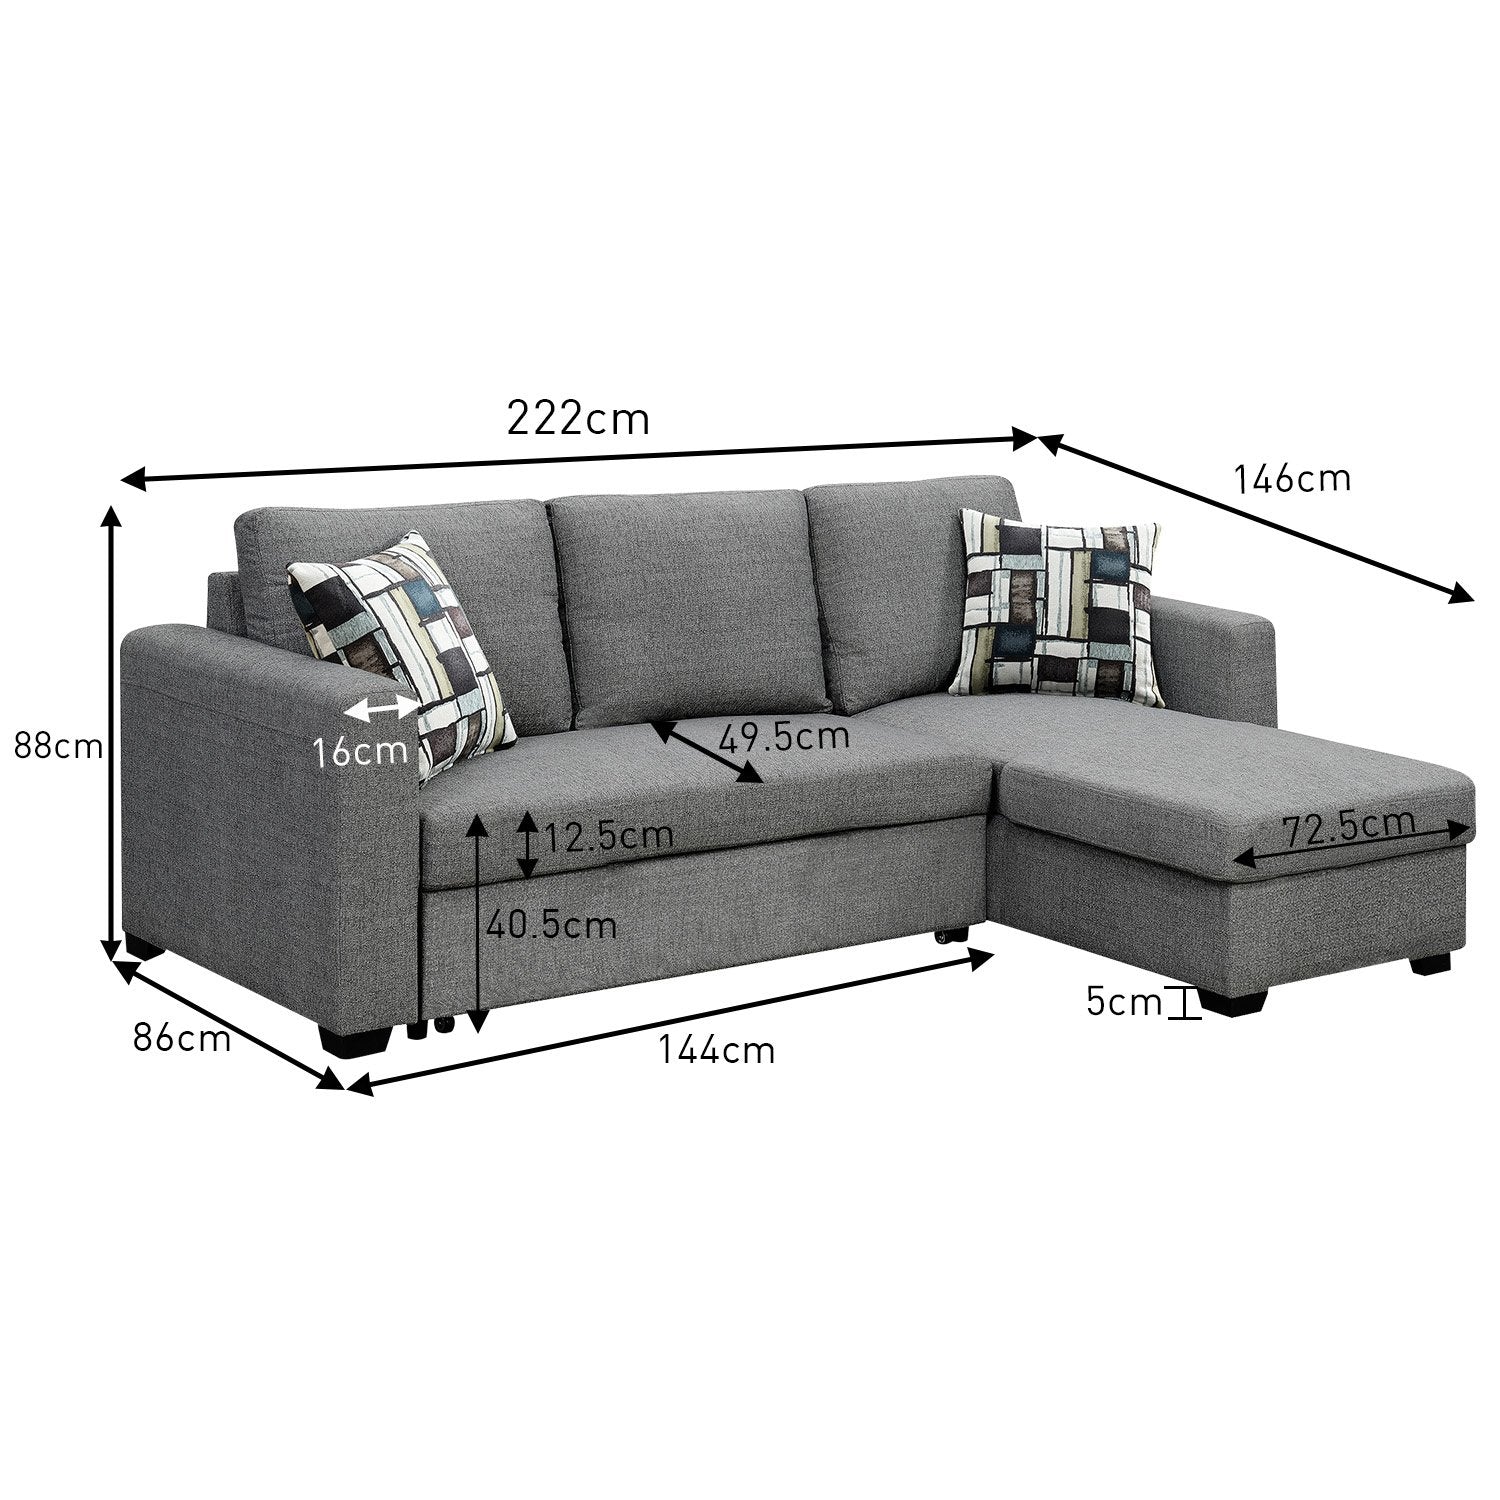 Fontana Pullout Sofa Bed with Storage Chaise Lounge - Grey